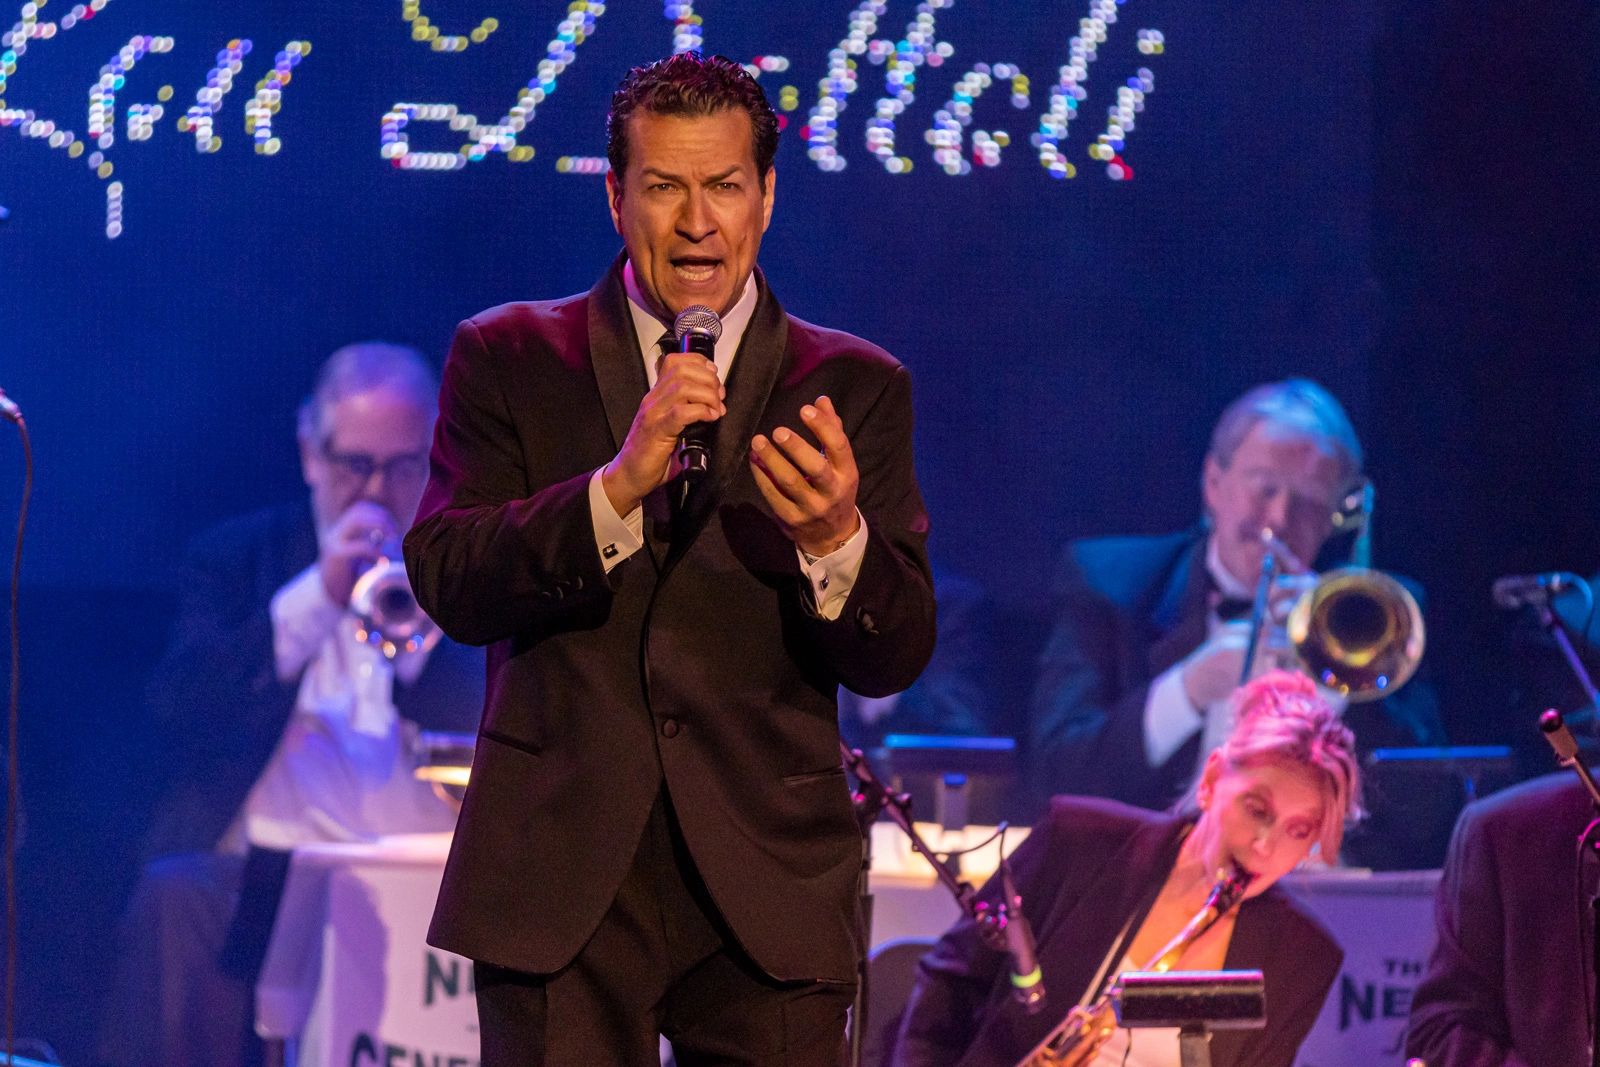 Sinatra Singer entertainer Lou Dottoli performing in concert with his big band.